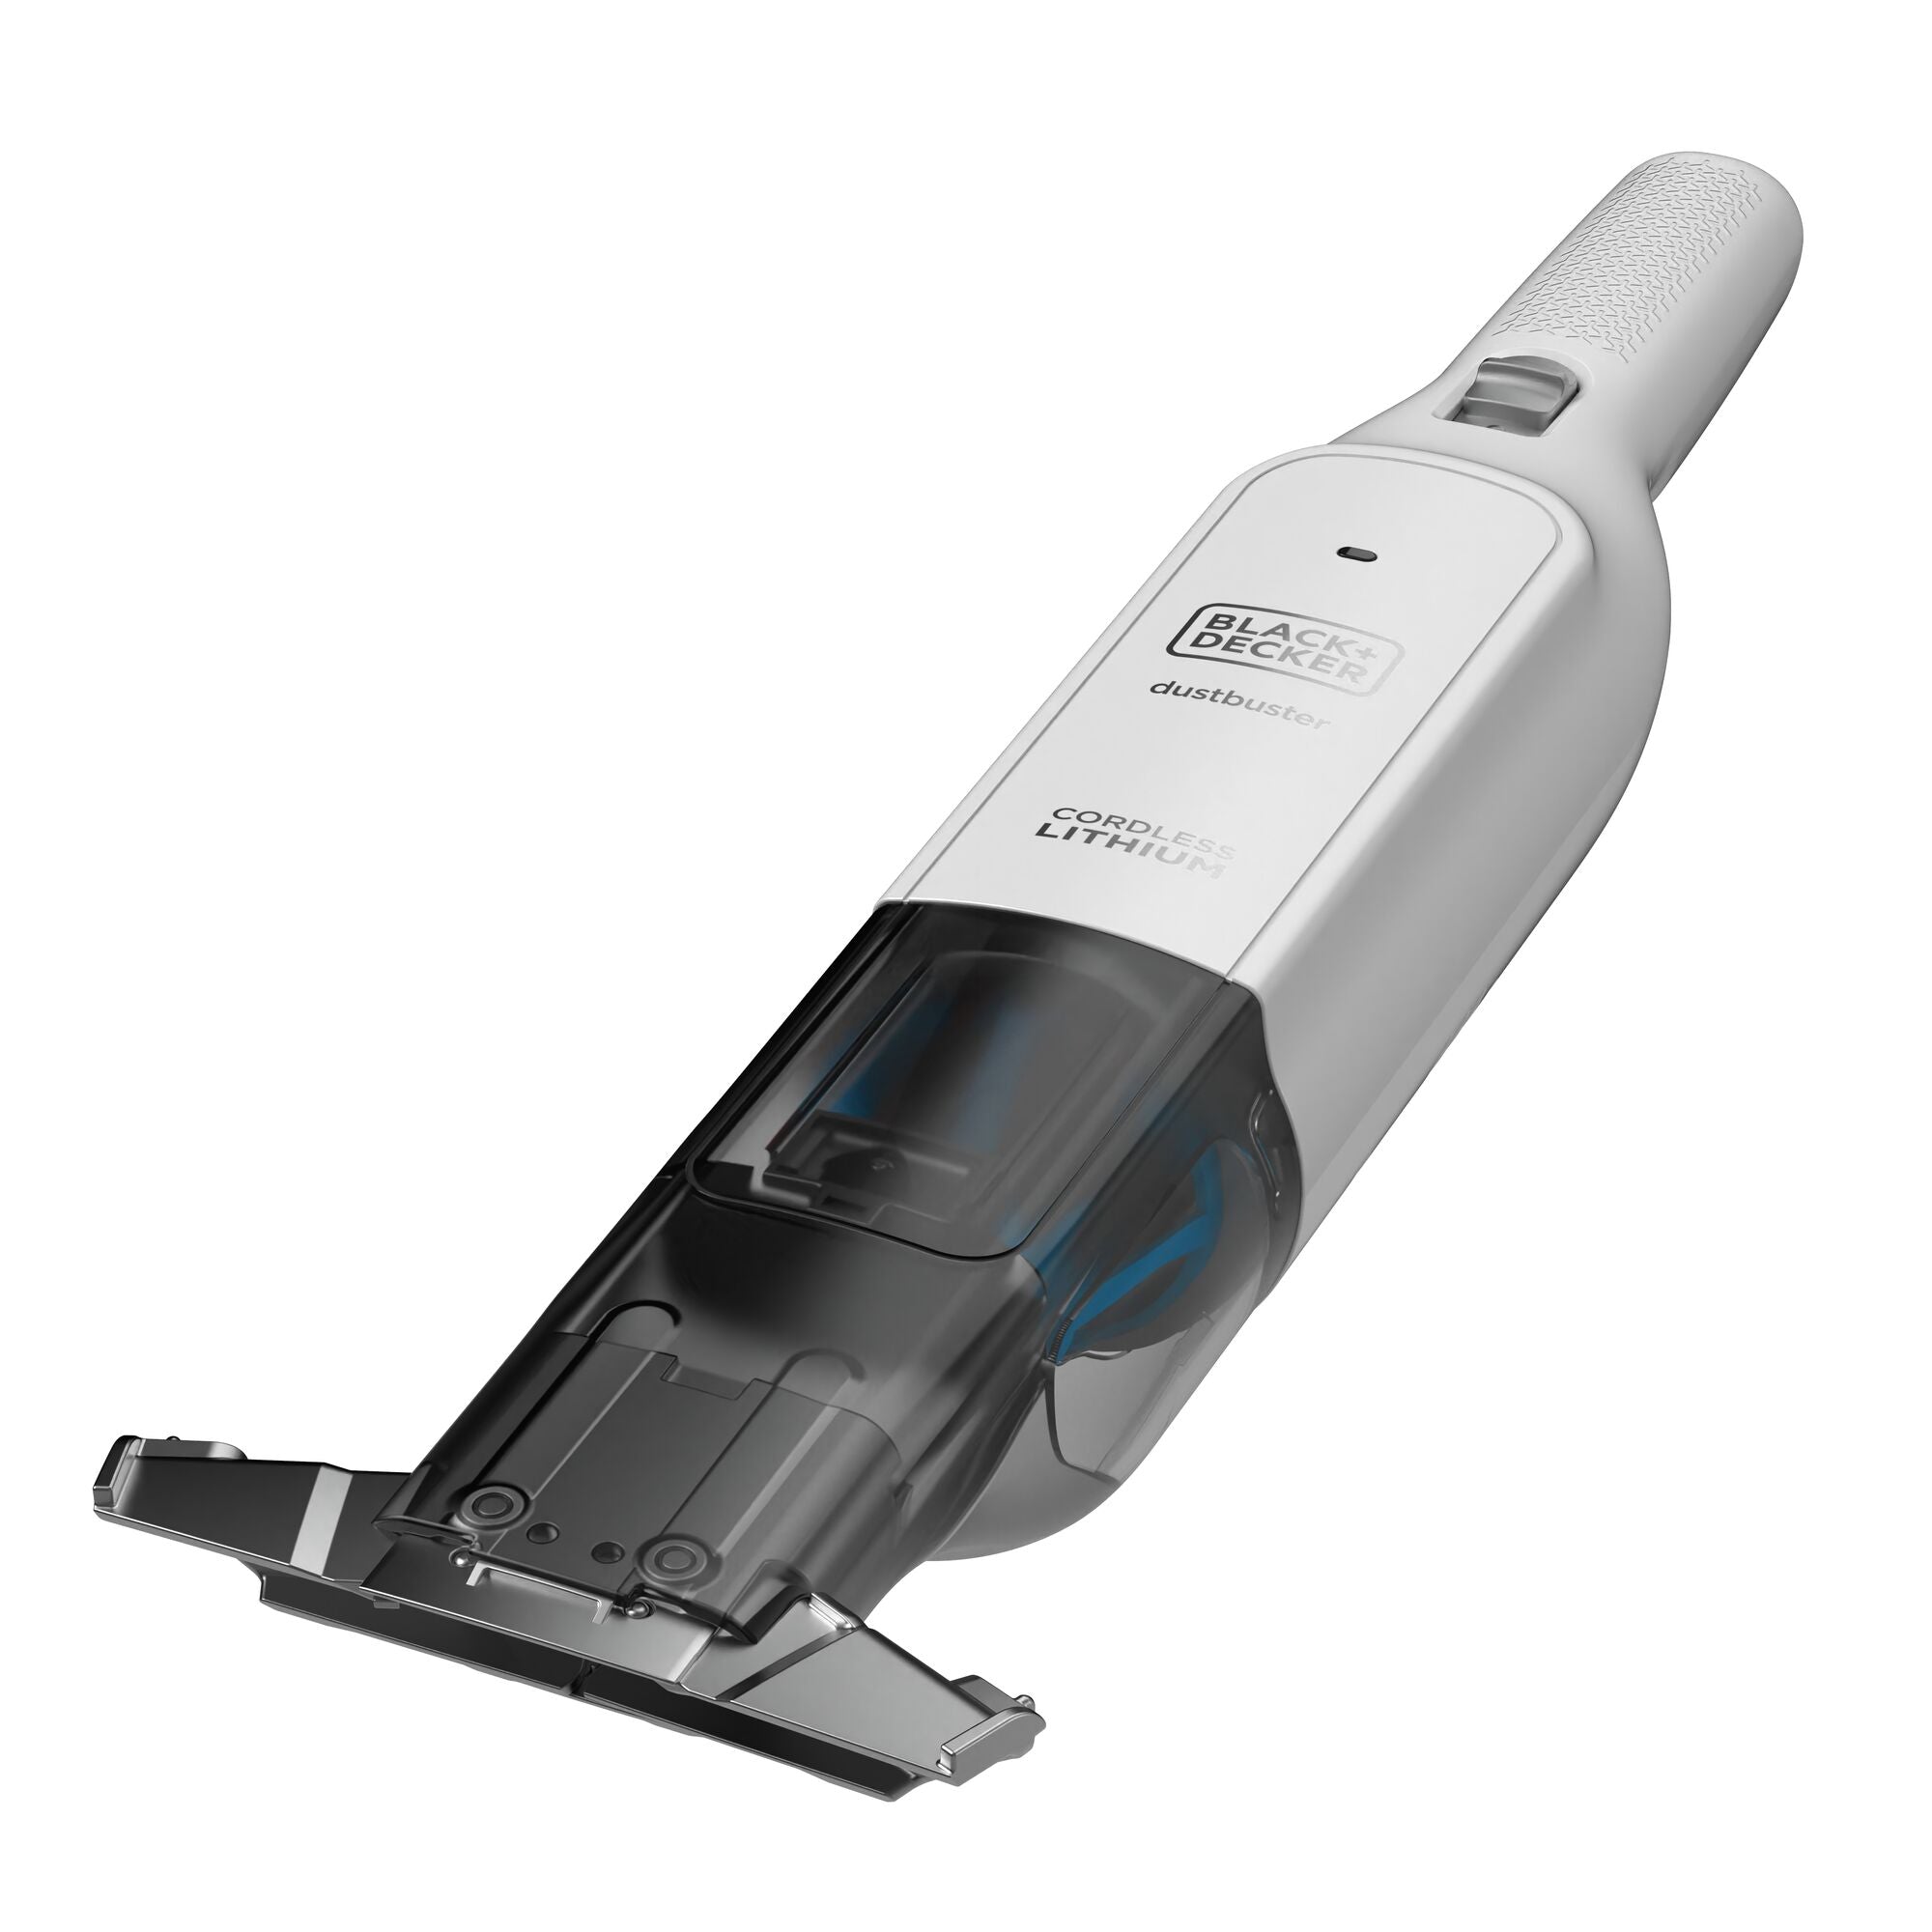 BUILT IN EXTRA WIDE NOZZLE feature of dust buster Advanced Clean Cordless Hand Vacuum.